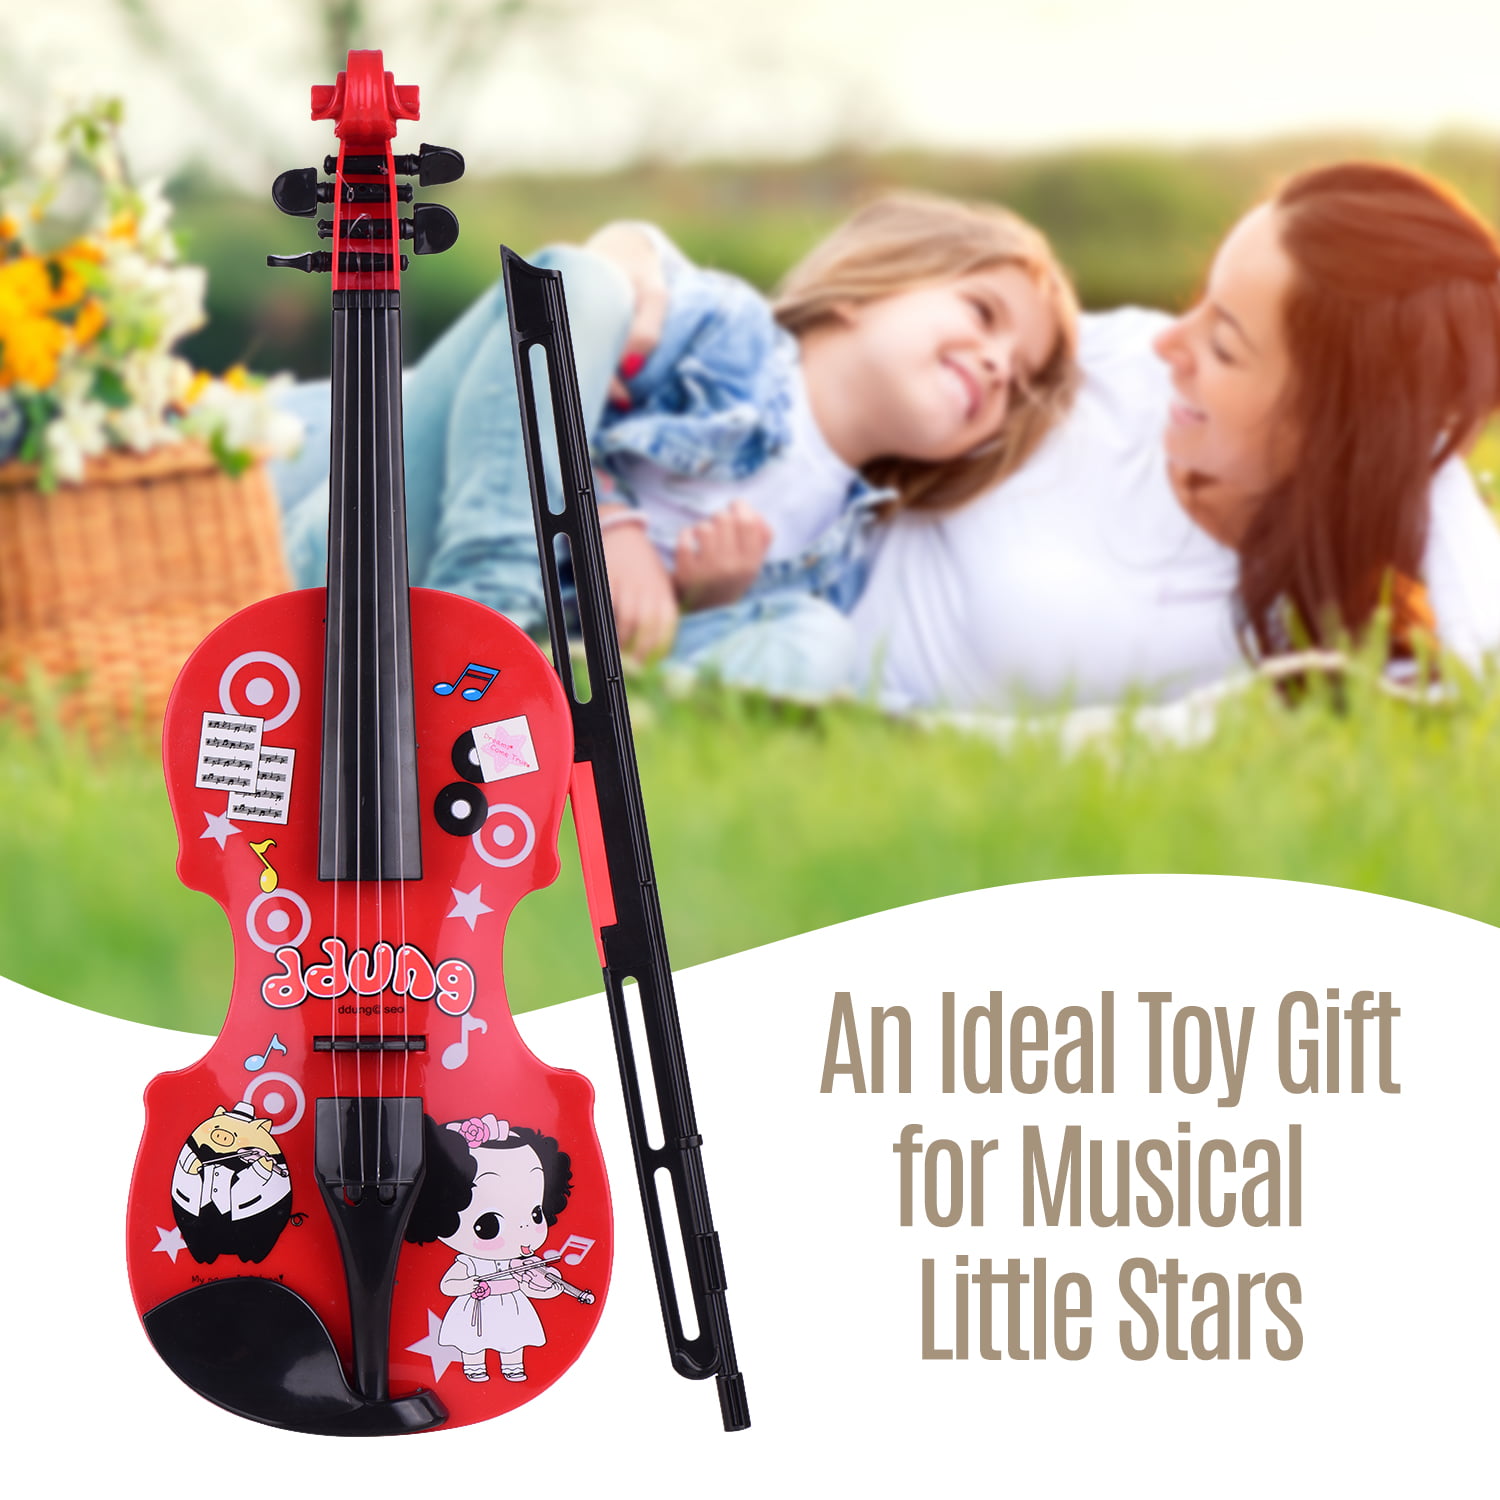 Kids Little Violin with Violin Bow Fun Educational Musical Instruments V1X9 